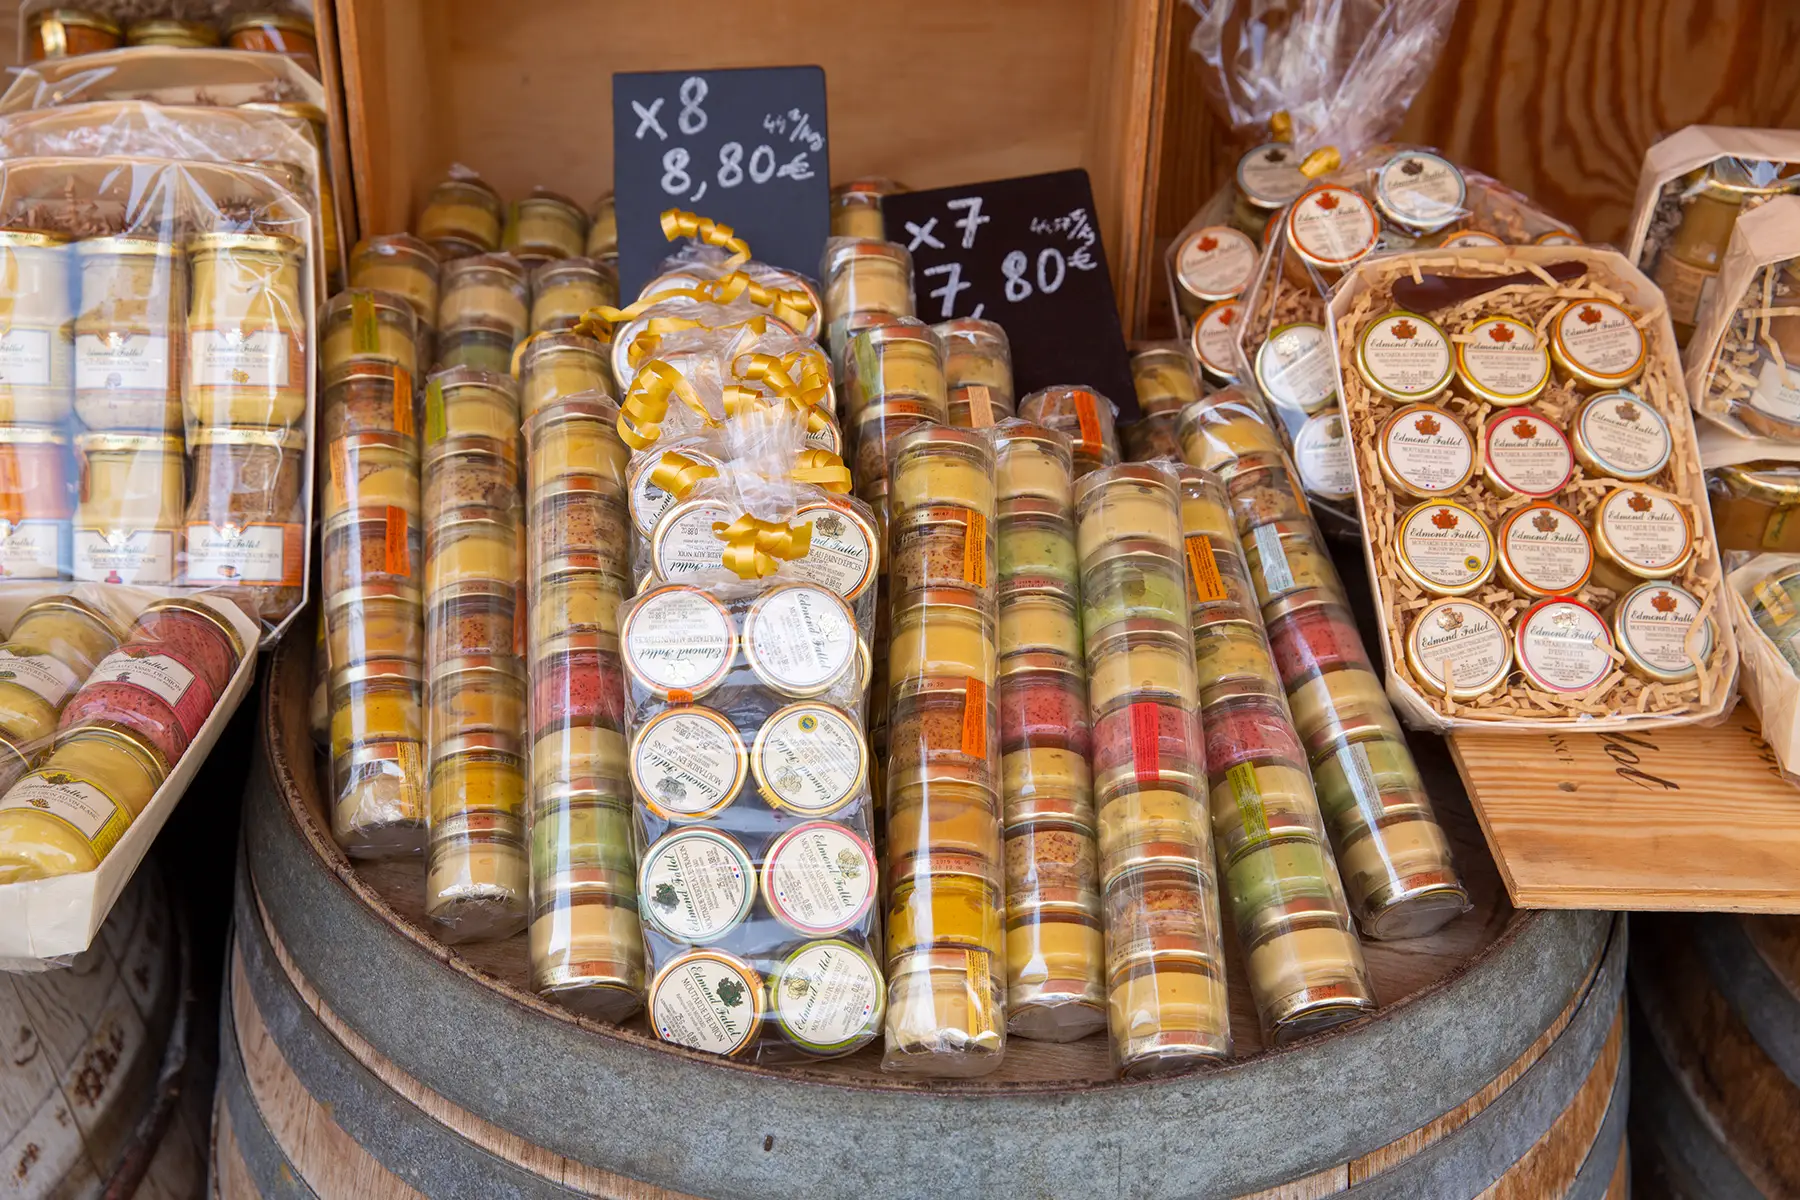 Different types of mustard on display in a shop in Dijon